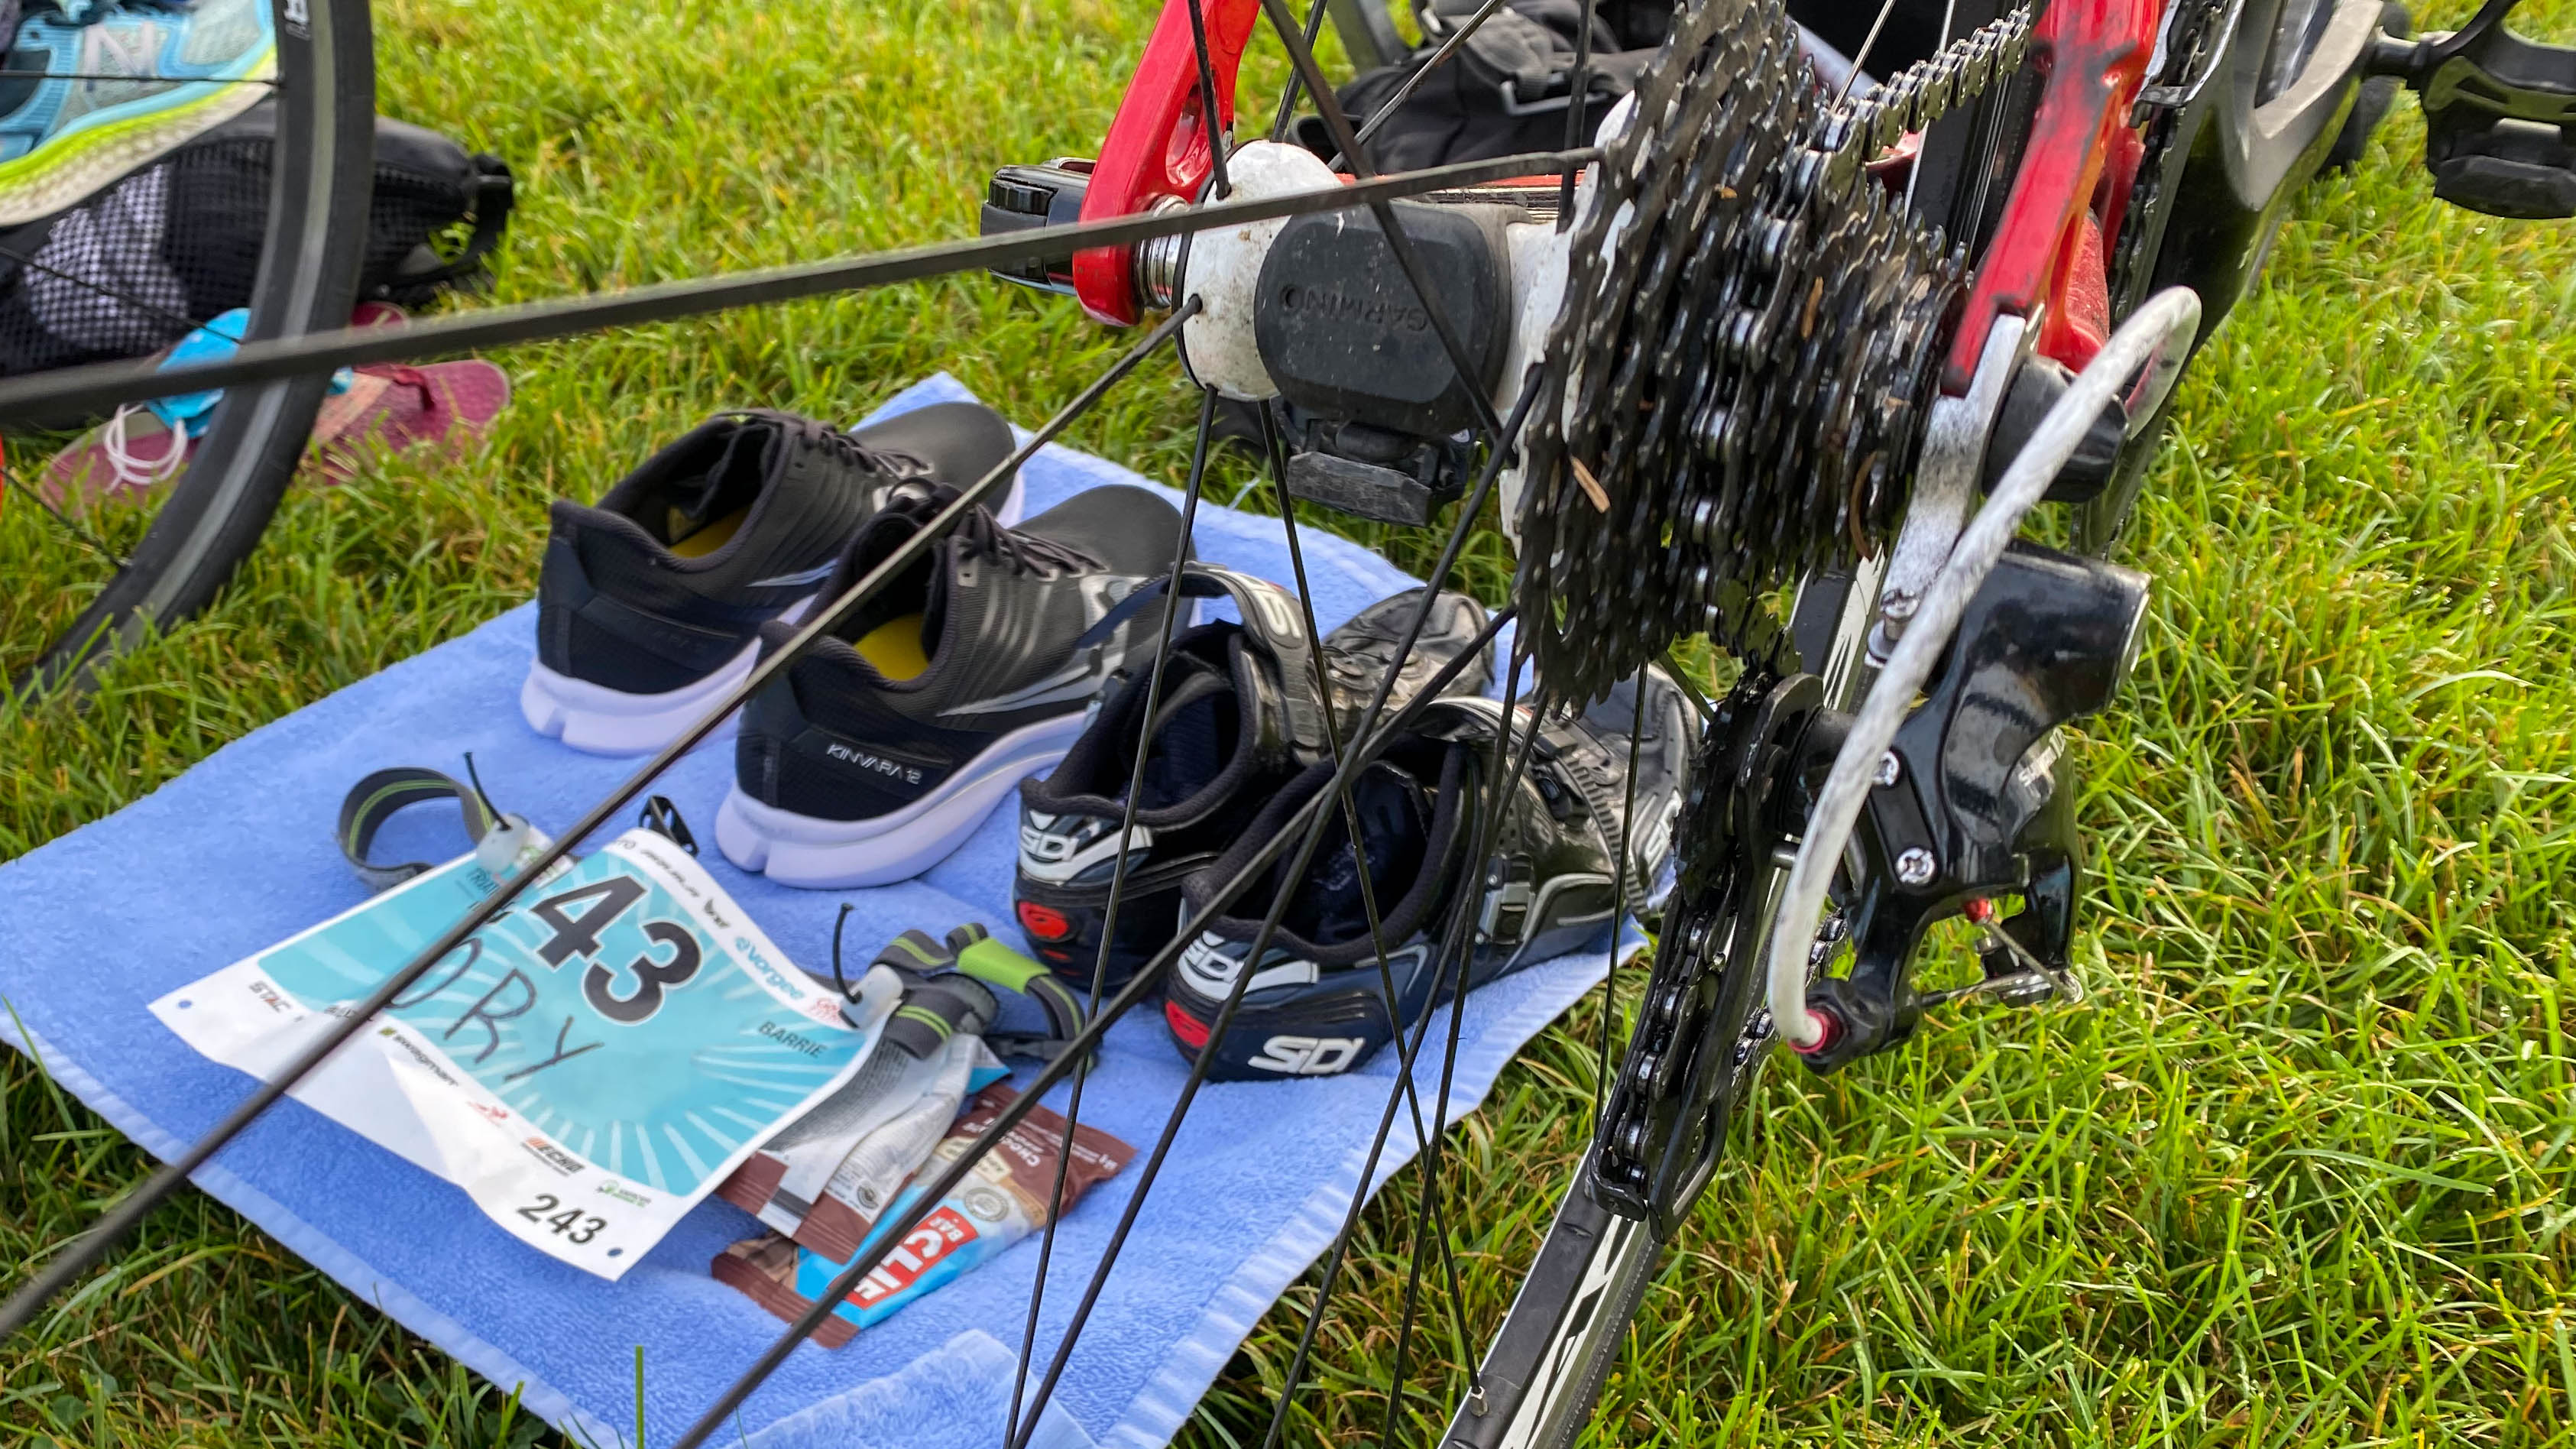 Setting up transition with shoes, towels, fuel, and race belt.